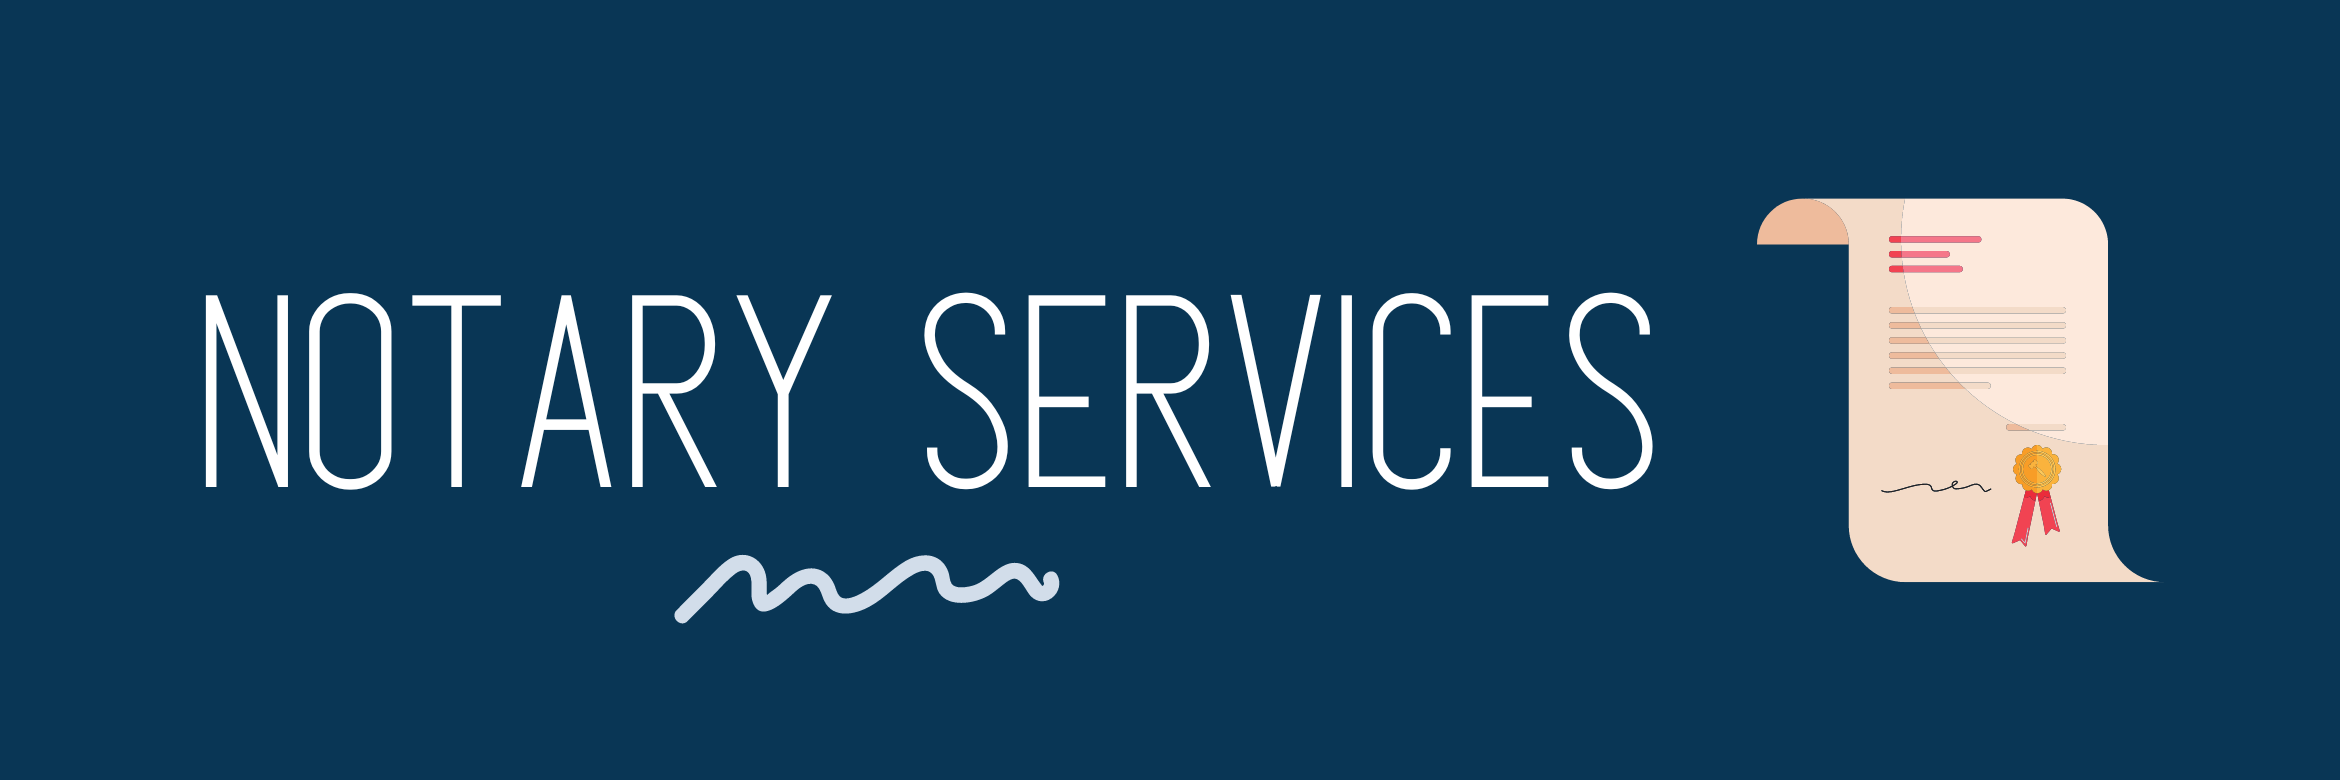 notary services header